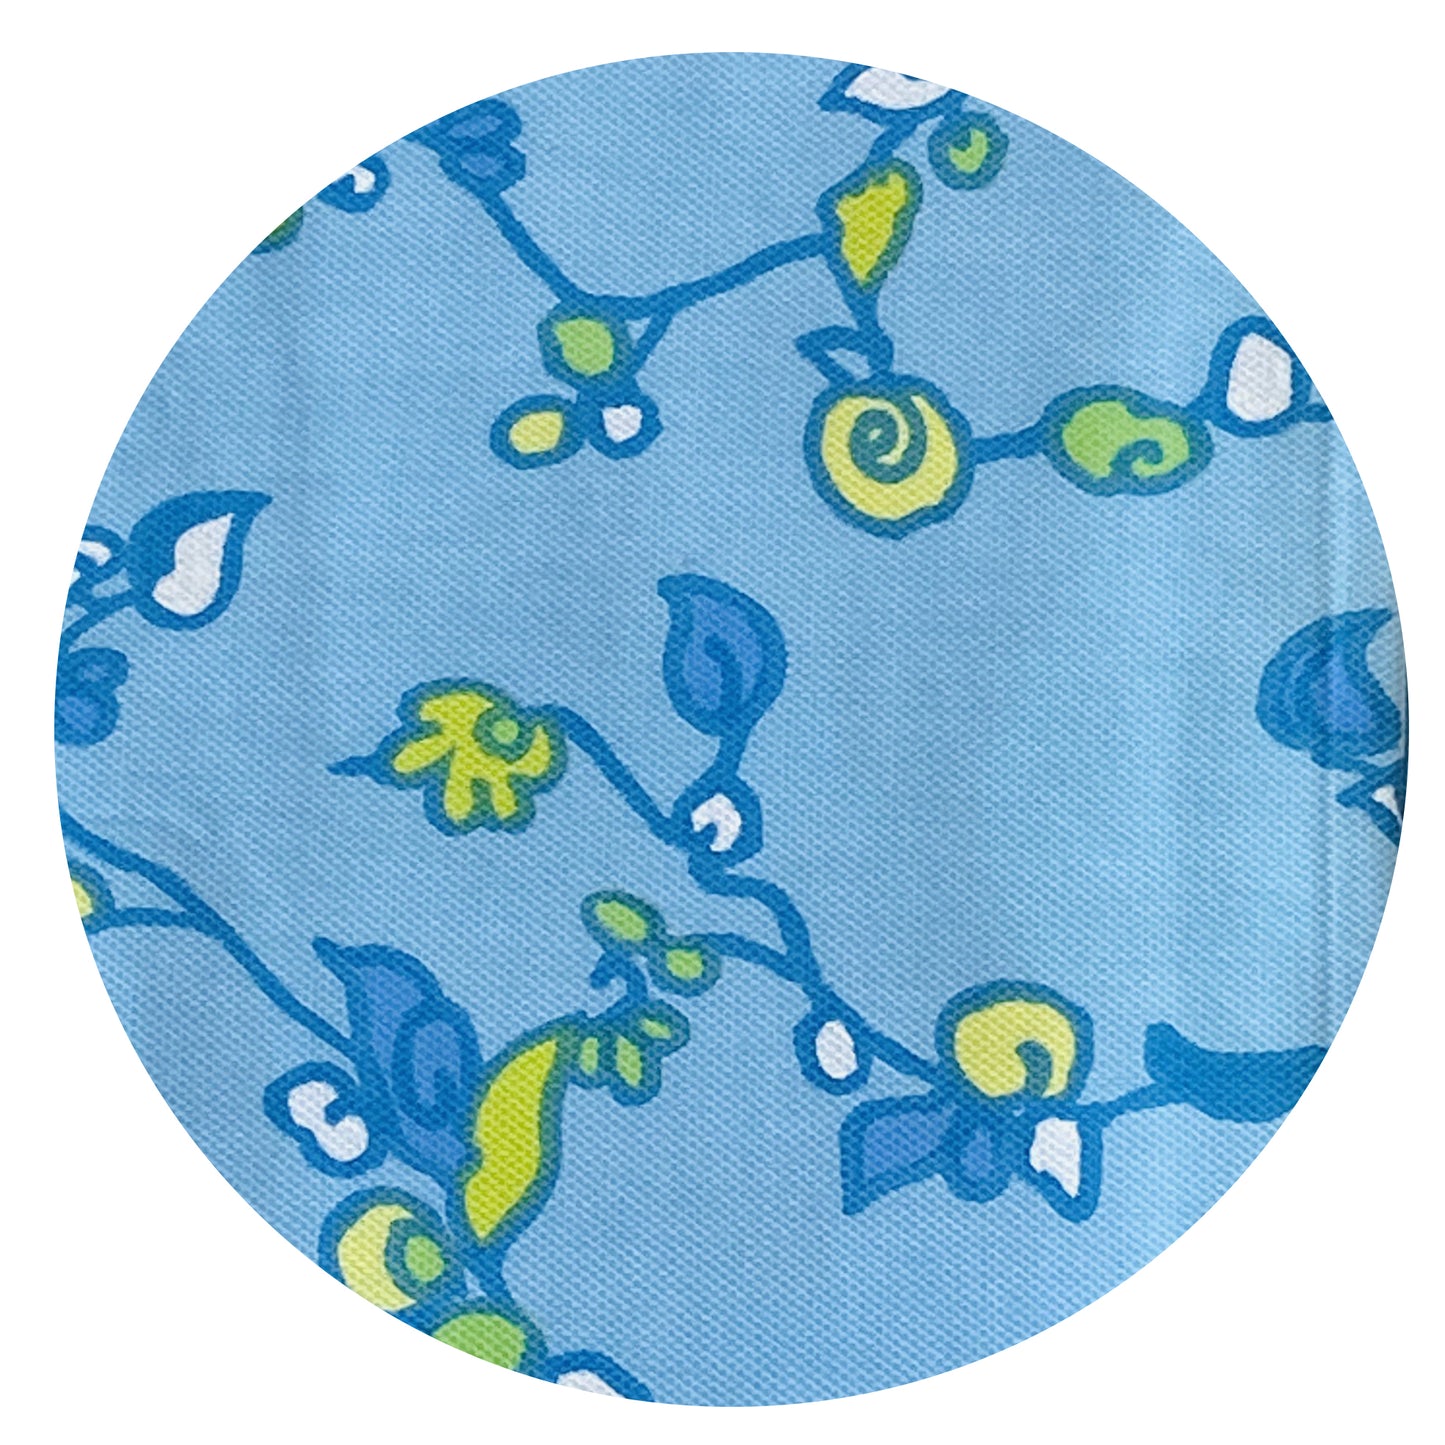 Cute Blue Floral Fabric ~ Fantastic Texture ~ Exclusive Sekers Fabric Vintage ~ BE CREATIVE!